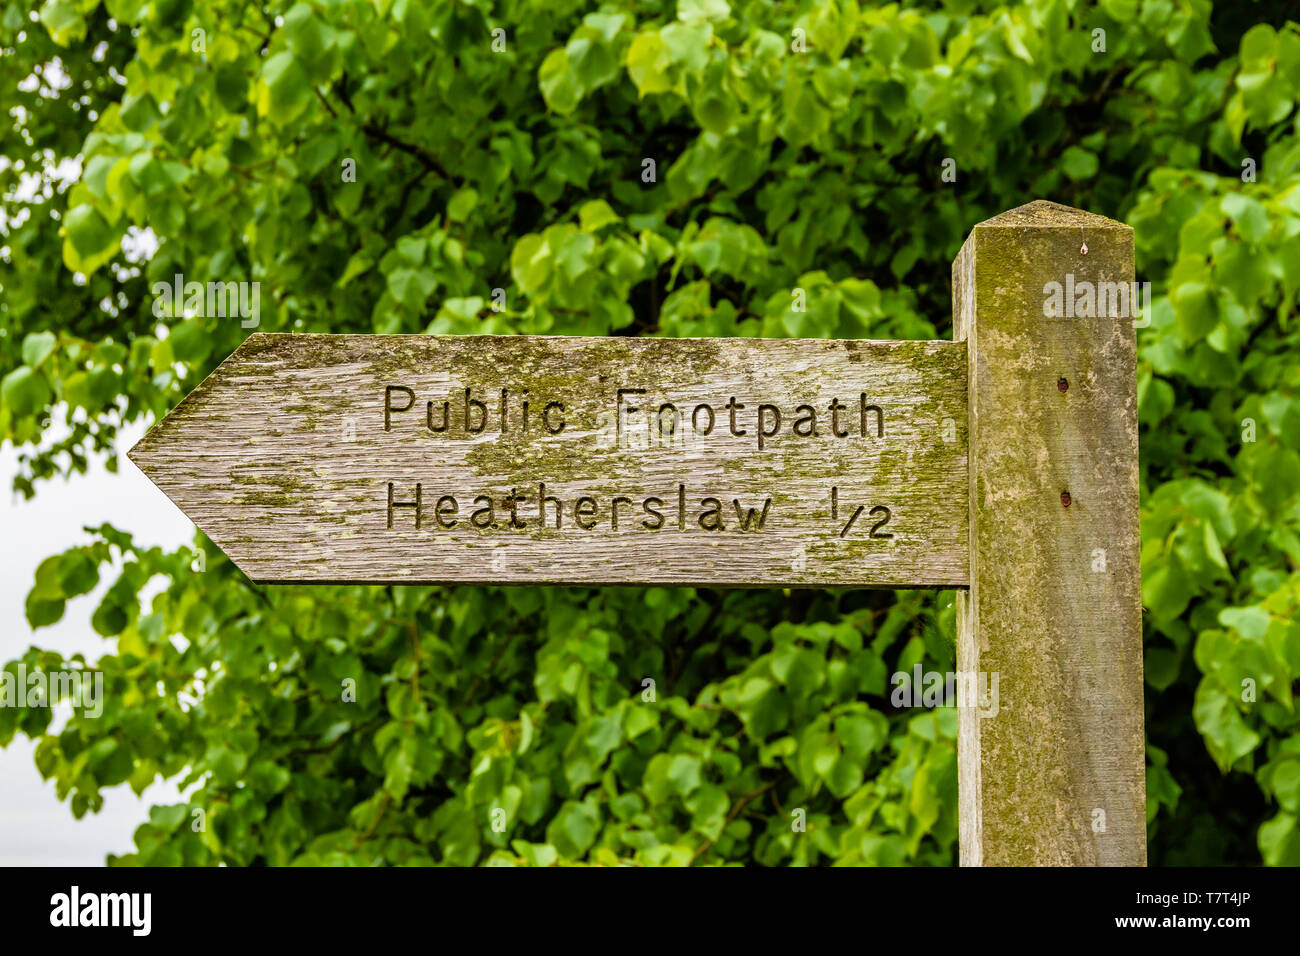 Wooden Public Footpath sign to Heatherslaw in Northumberland, UK. May 2018. Stock Photo